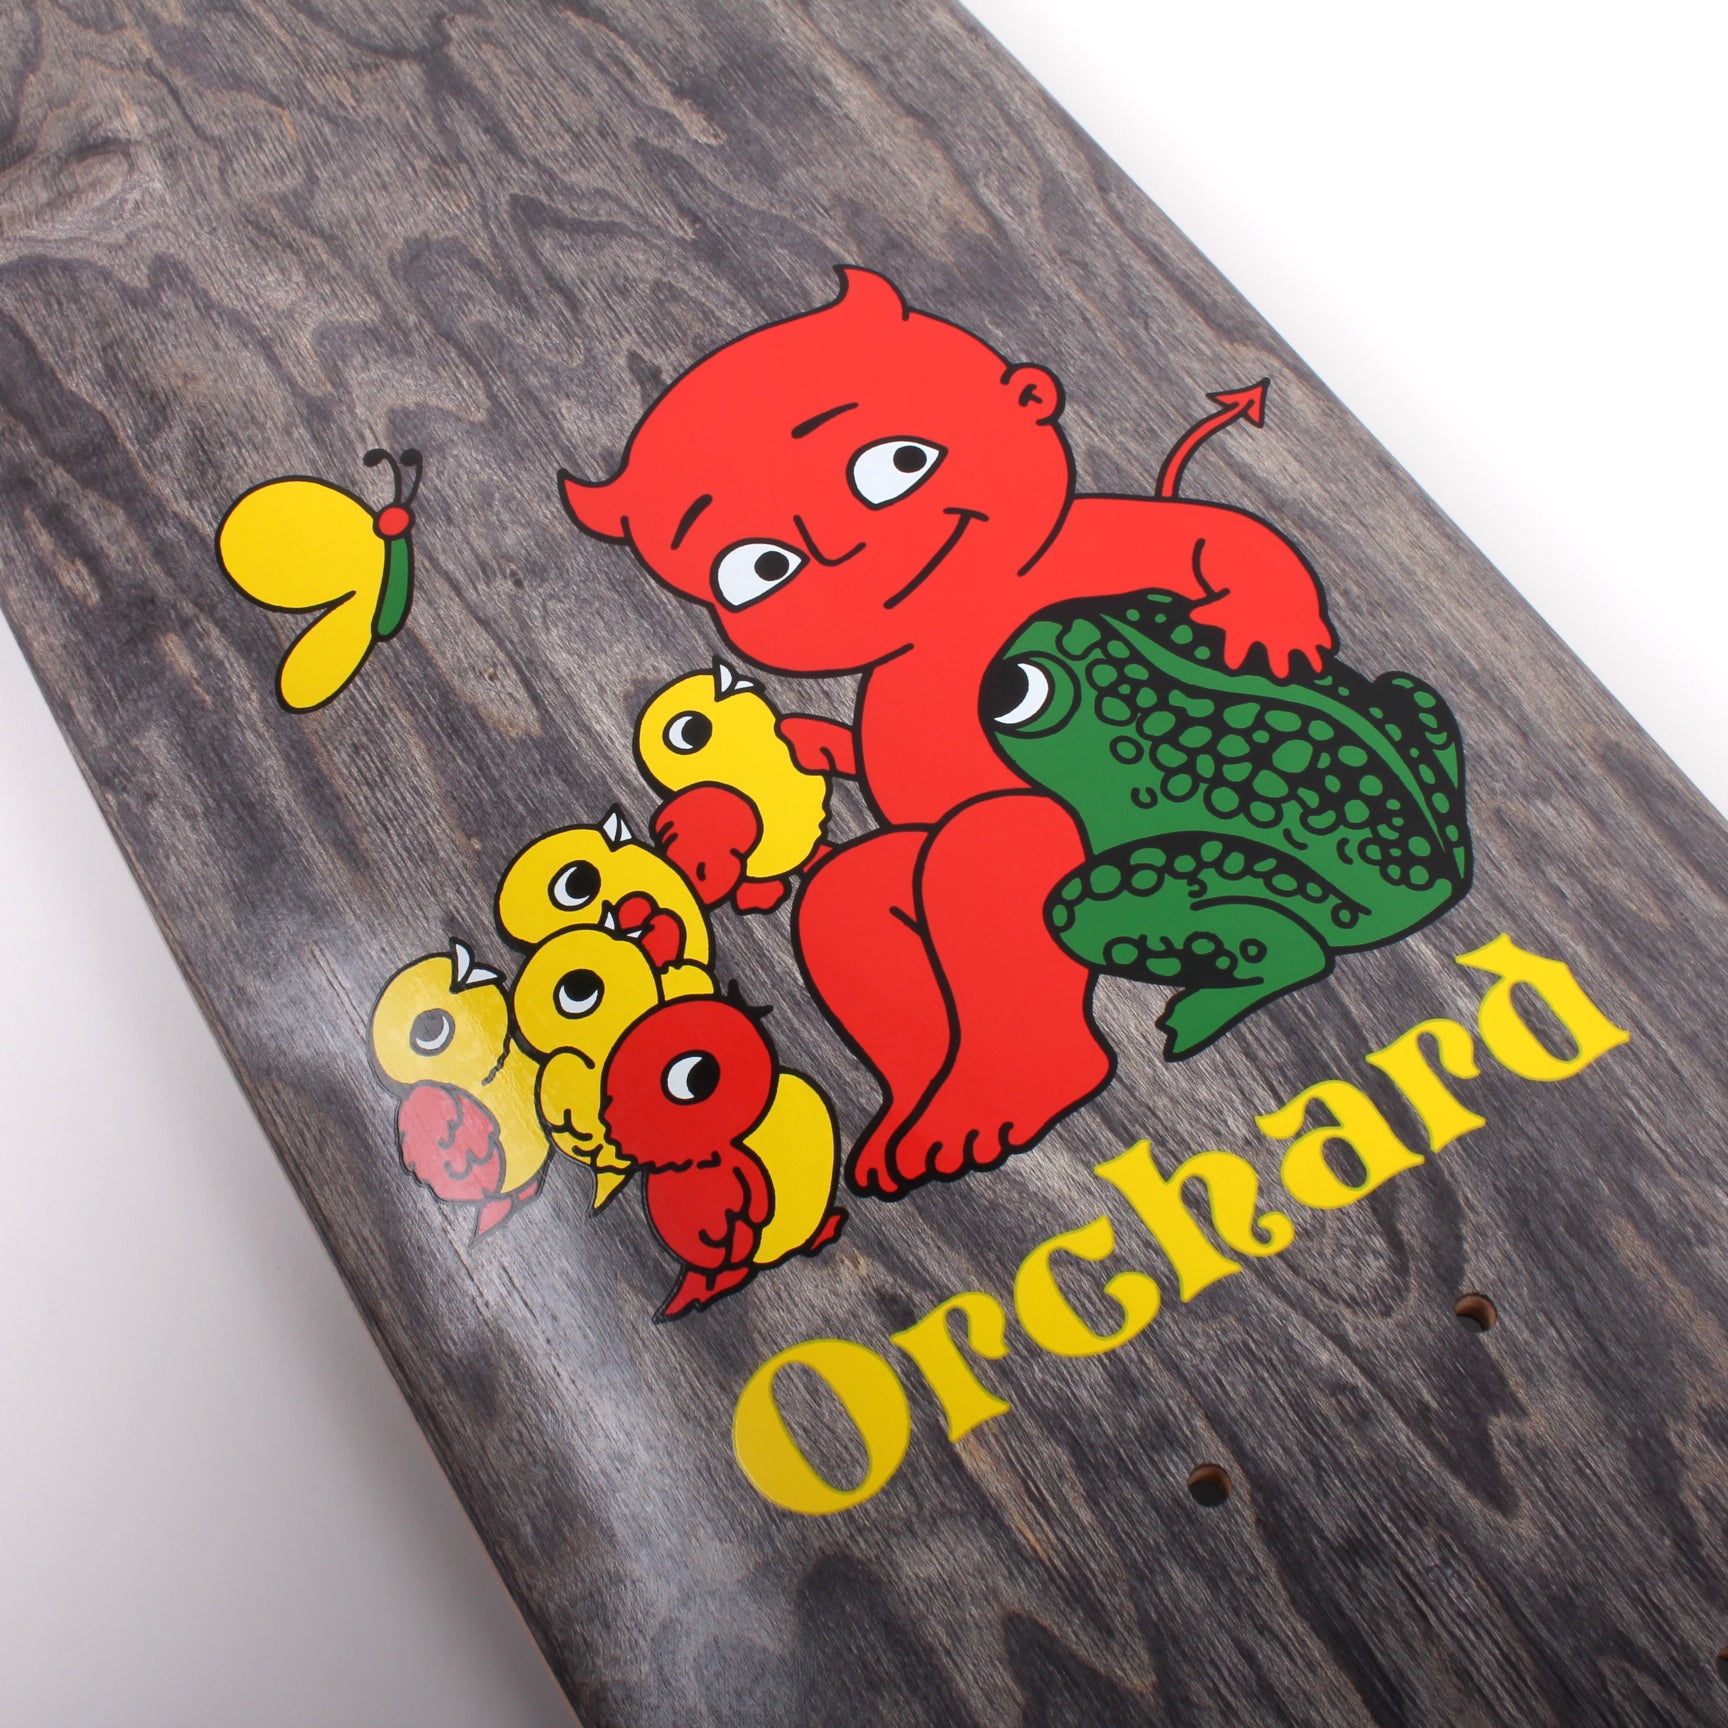 Orchard Woodland Mingyan Deck Assorted Stains 8.1"